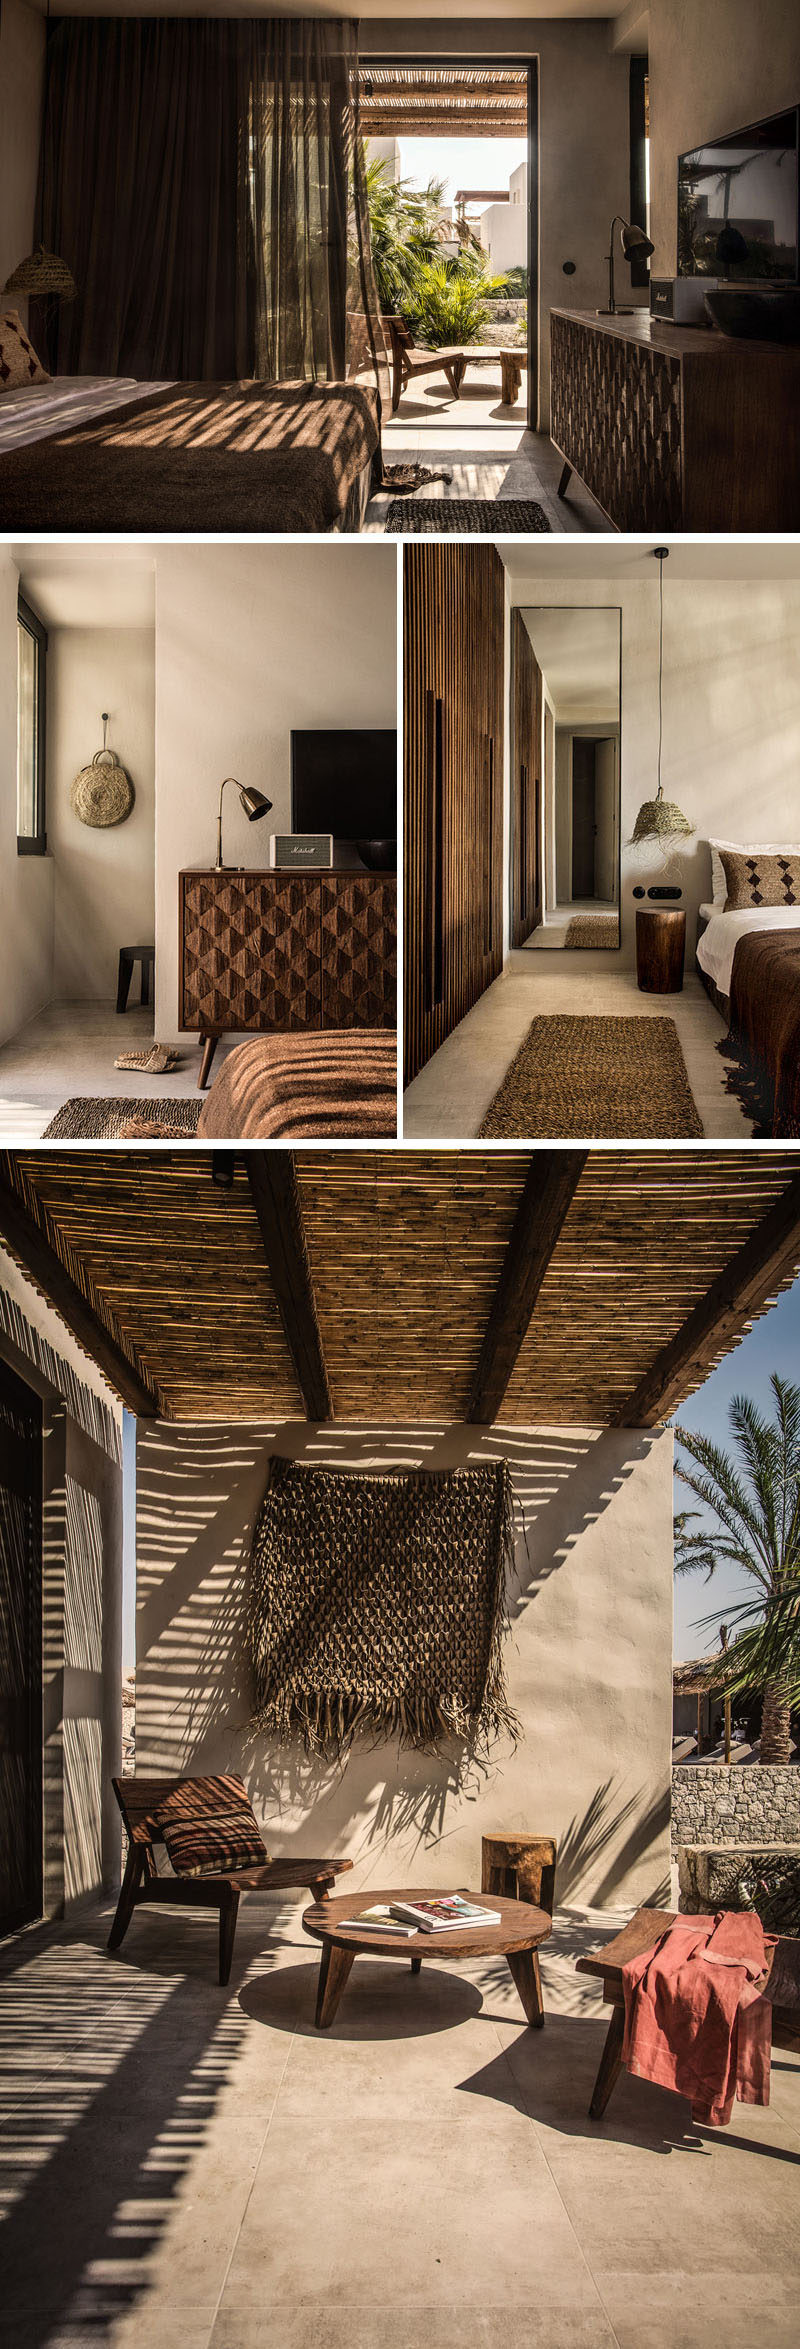 Each room and villa throughout this contemporary Greece hotel have access to a private veranda or terrace. #HotelRoom #Hotel #Greece #InteriorDesign